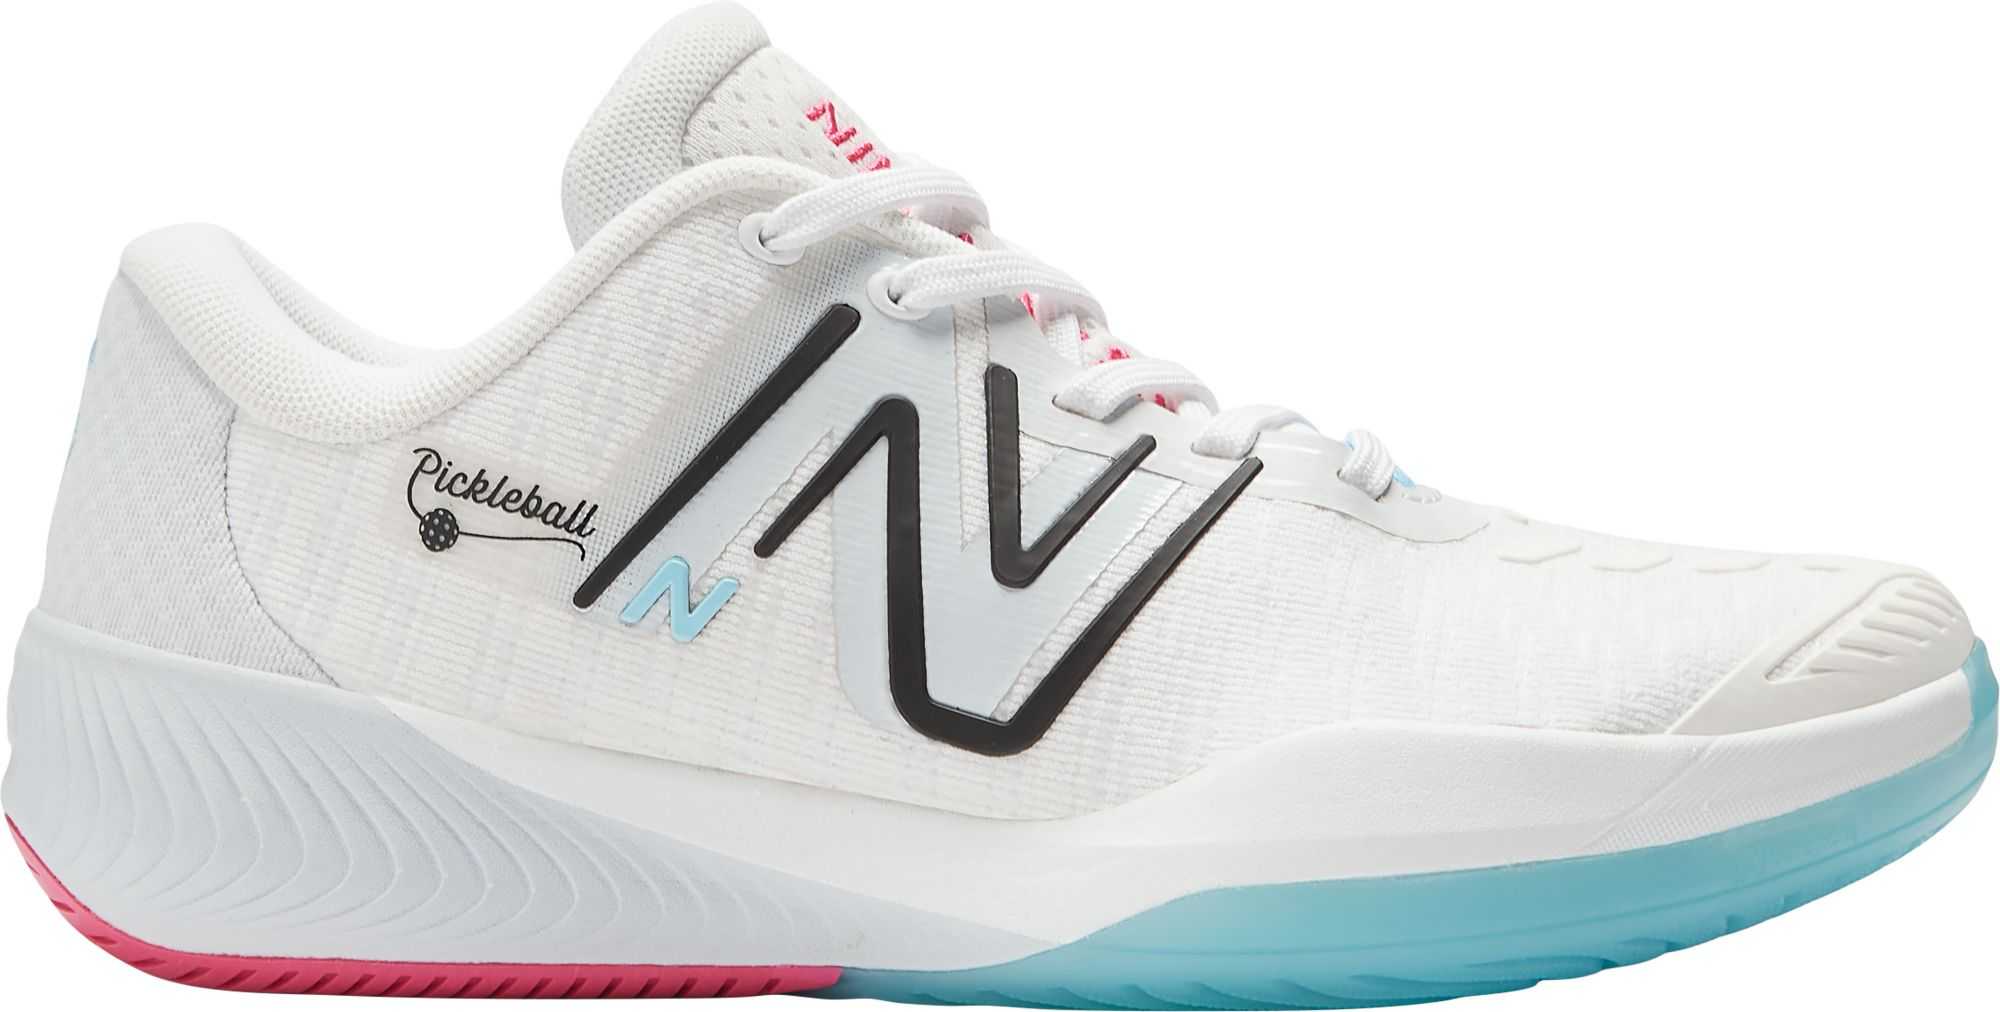 New Balance Women's Fuel Cell 996V5 Pickleball Shoes